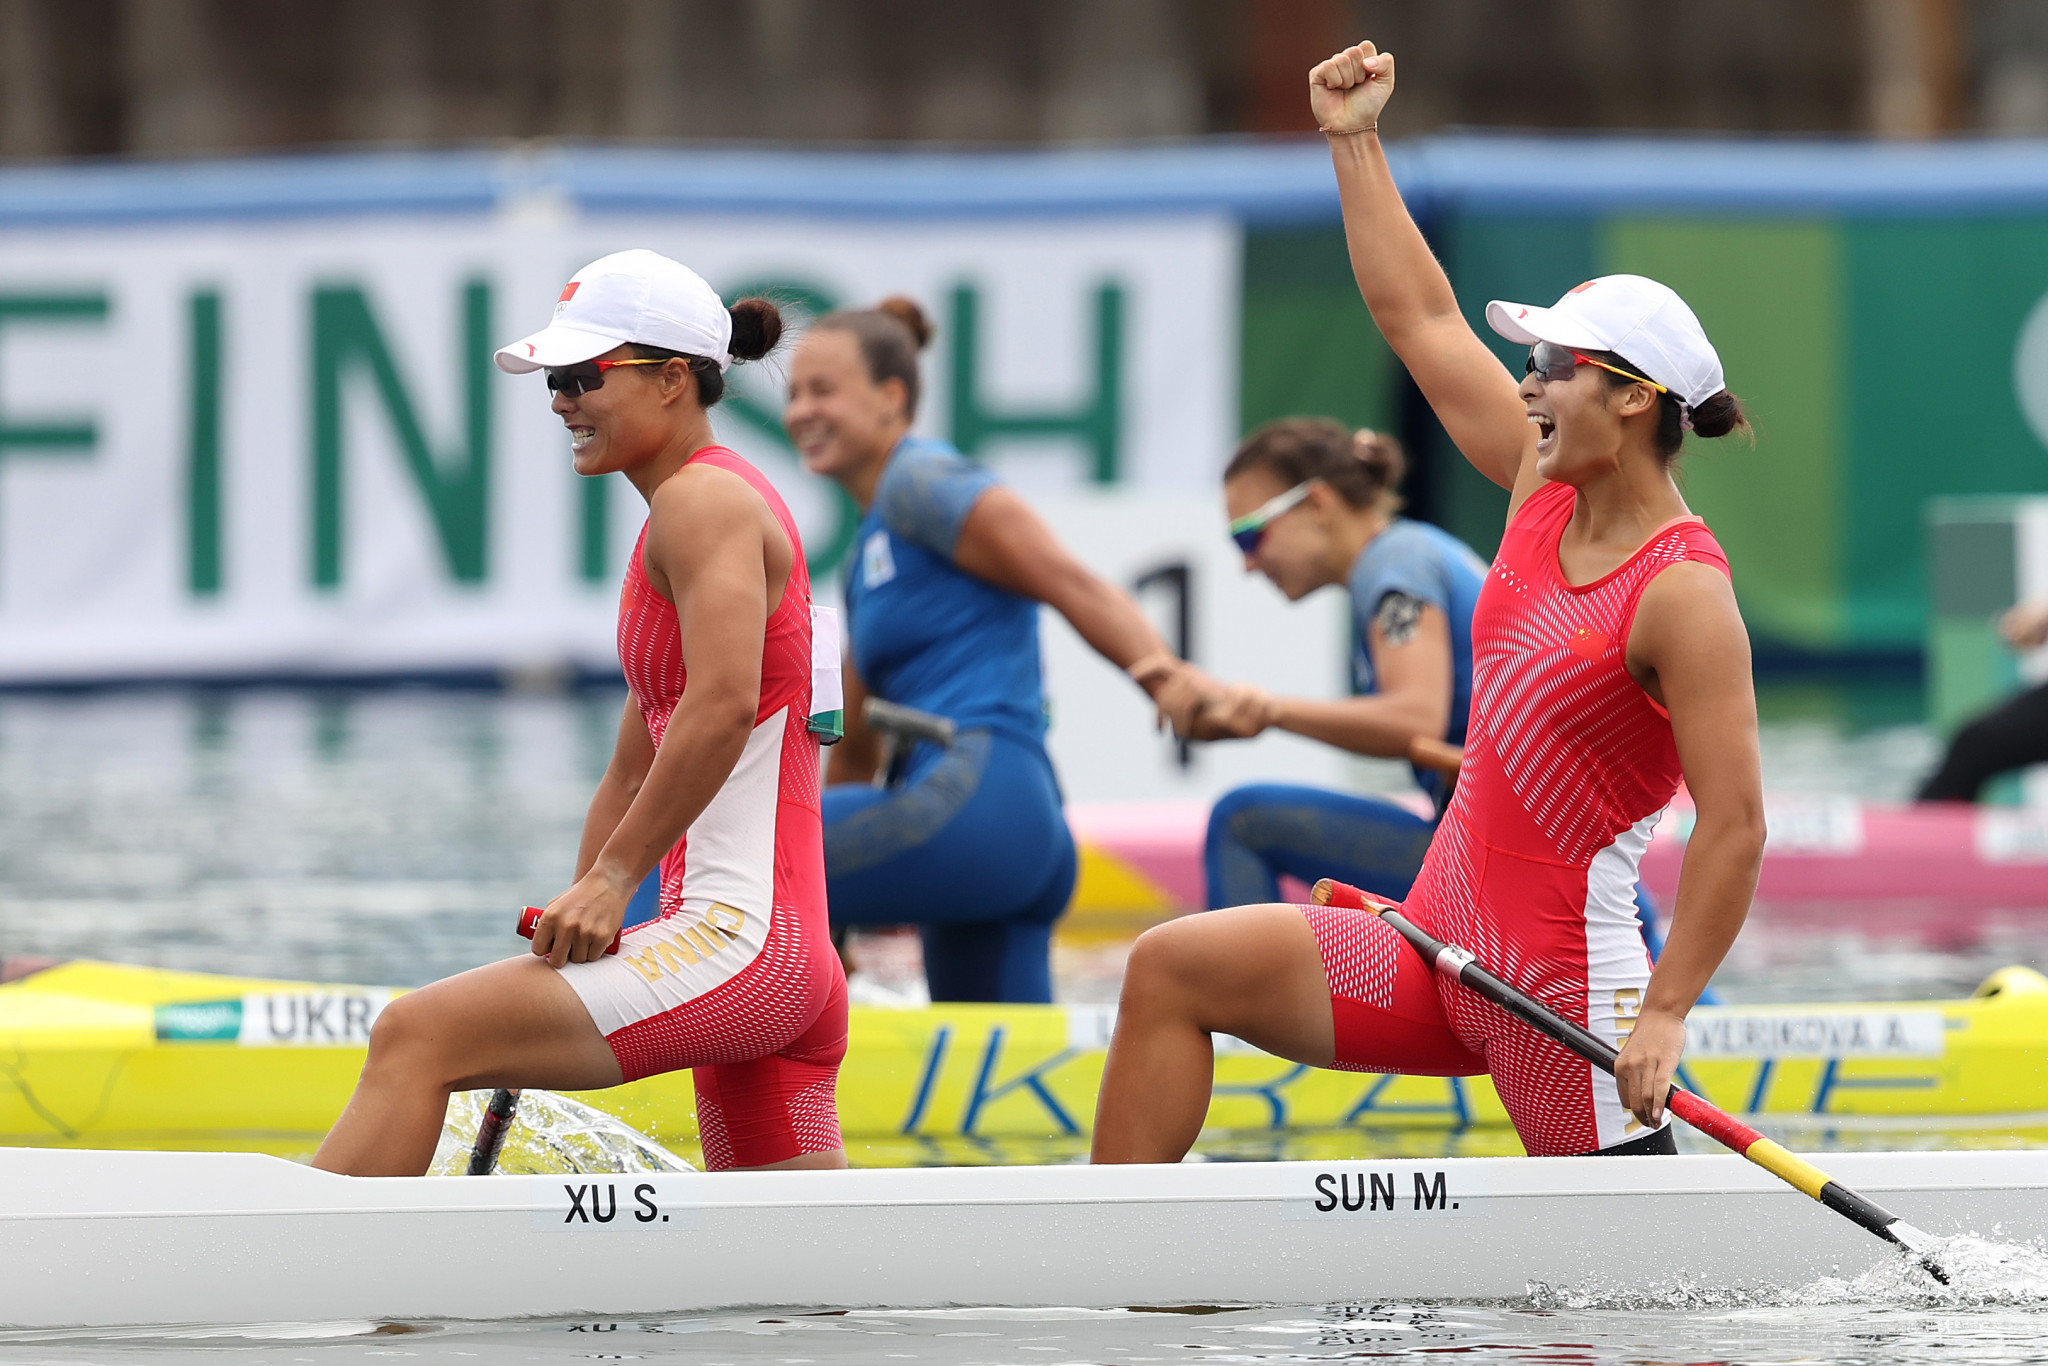 China's Olympic champions Xu Shixiao and Sun Mengya are set to race this weekend after  starting their World Cup campaign with victory in Račice last week ©Getty Images